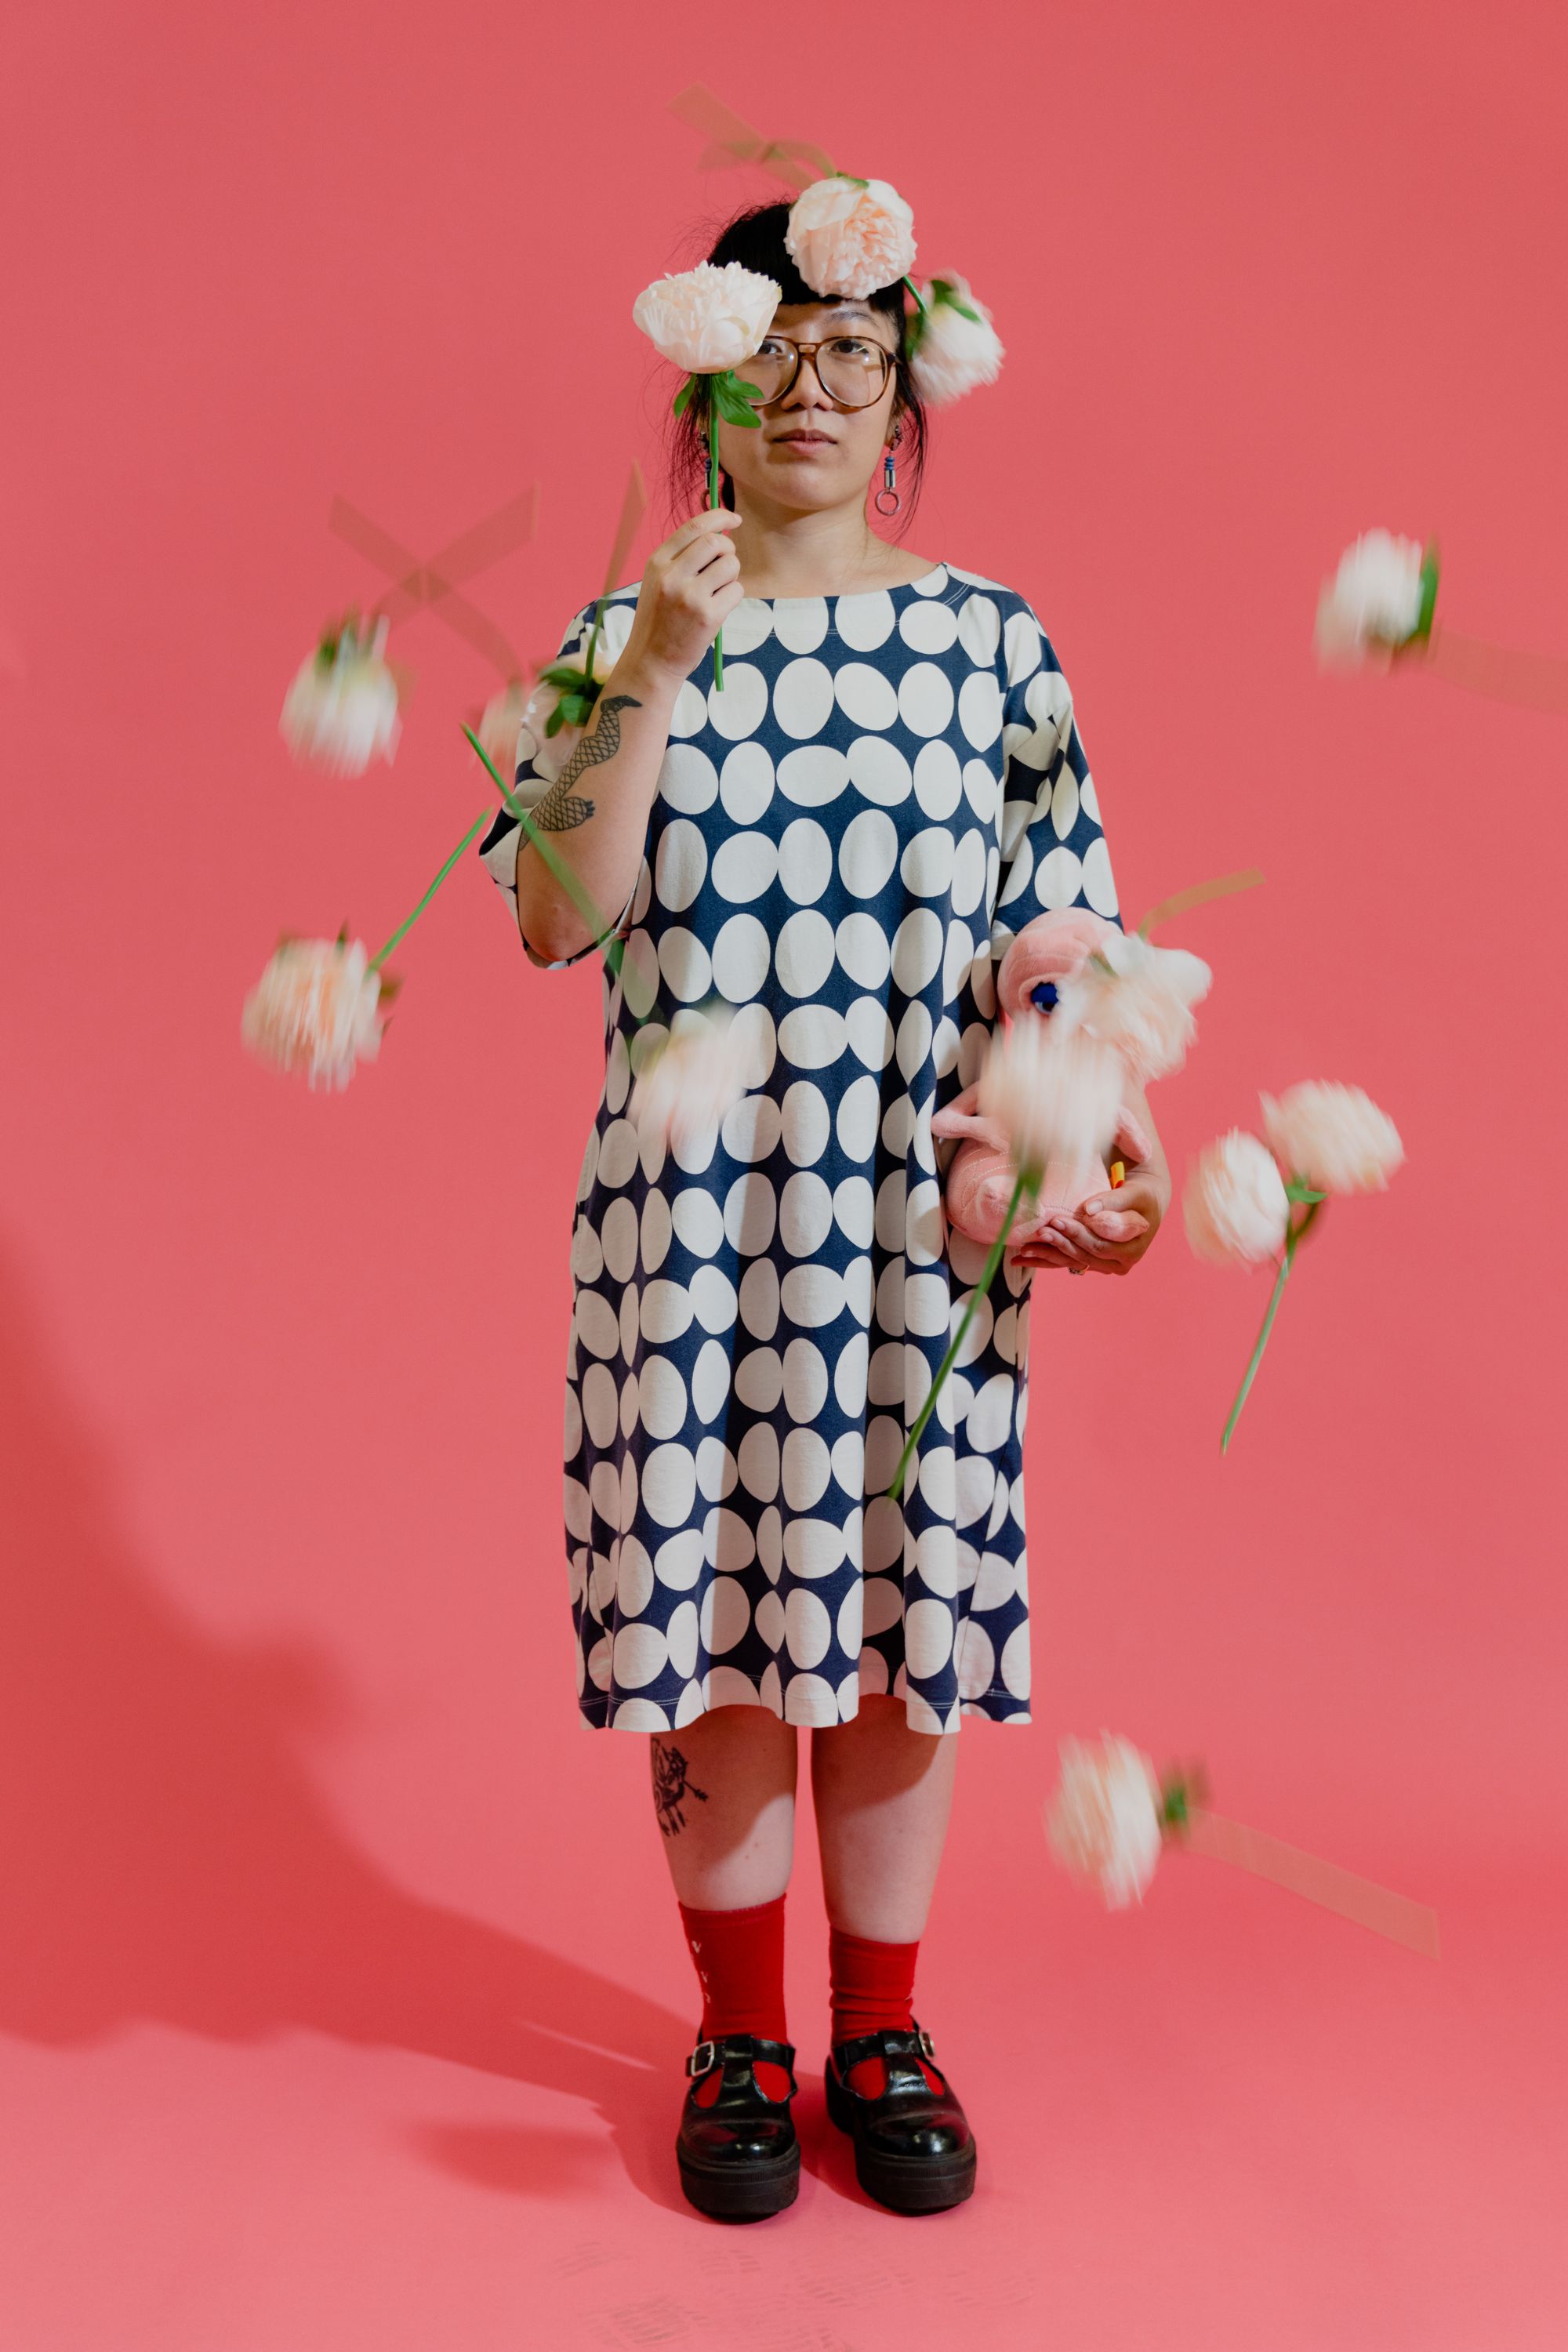 Photographic portrait of painter and illustrator Kristen Liu-Wong standing against a pink backdrop with falling peonies captured in action around her body.